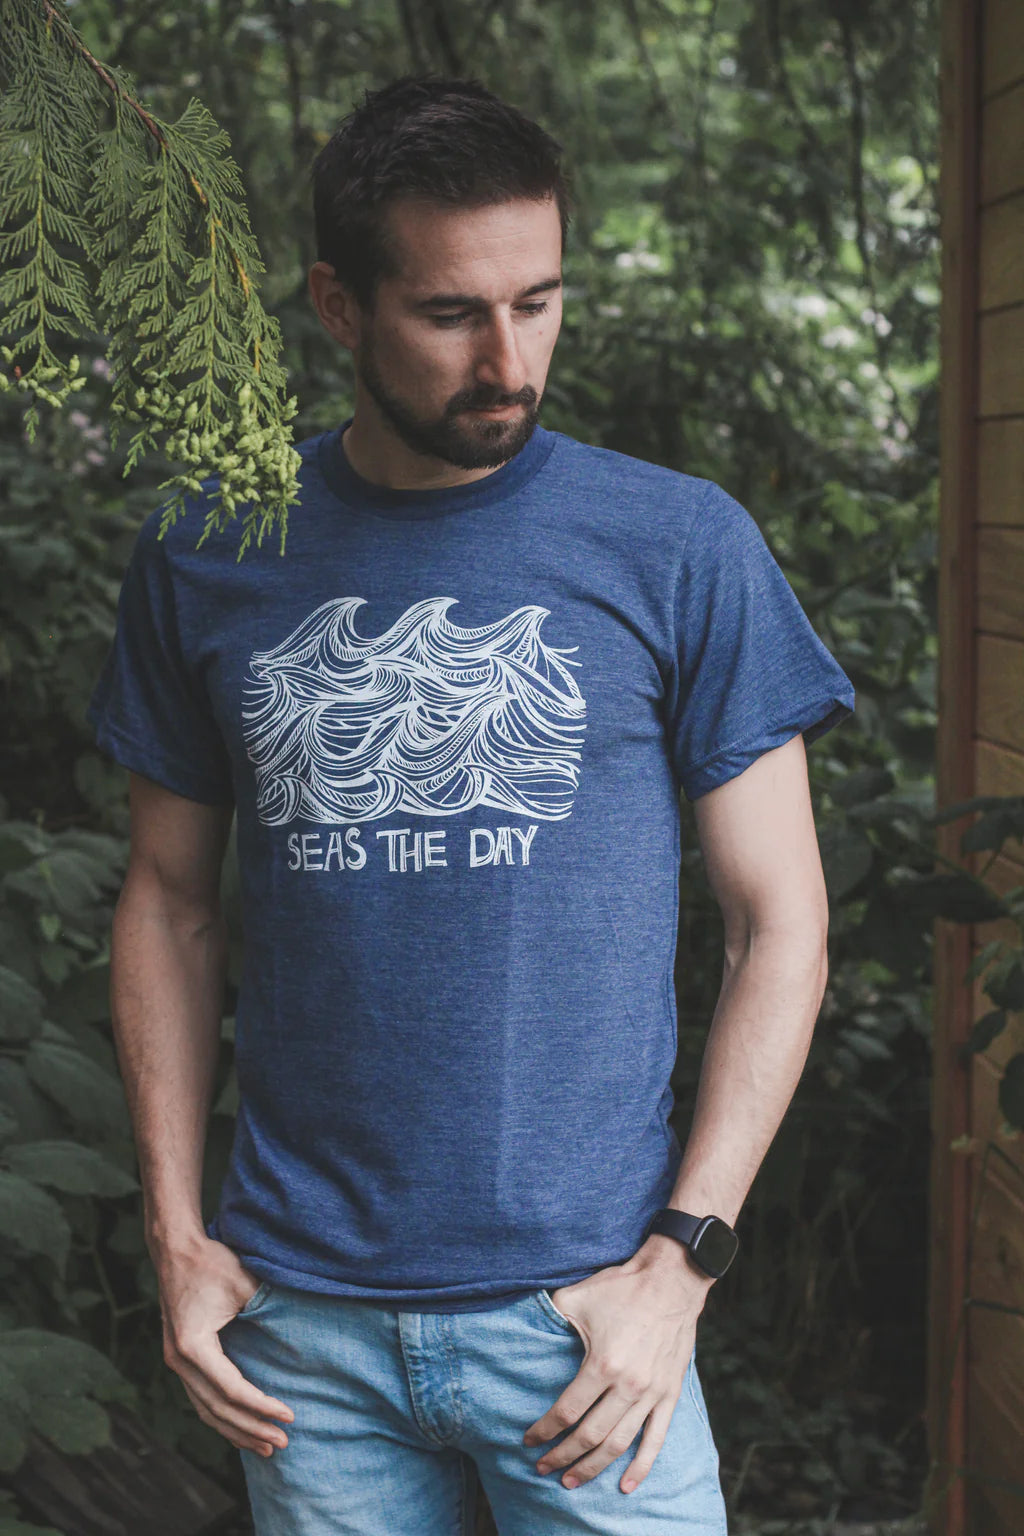 T Shirt Seas The Day m - T Shirt Seas The Day m -  - House of Himwitsa Native Art Gallery and Gifts